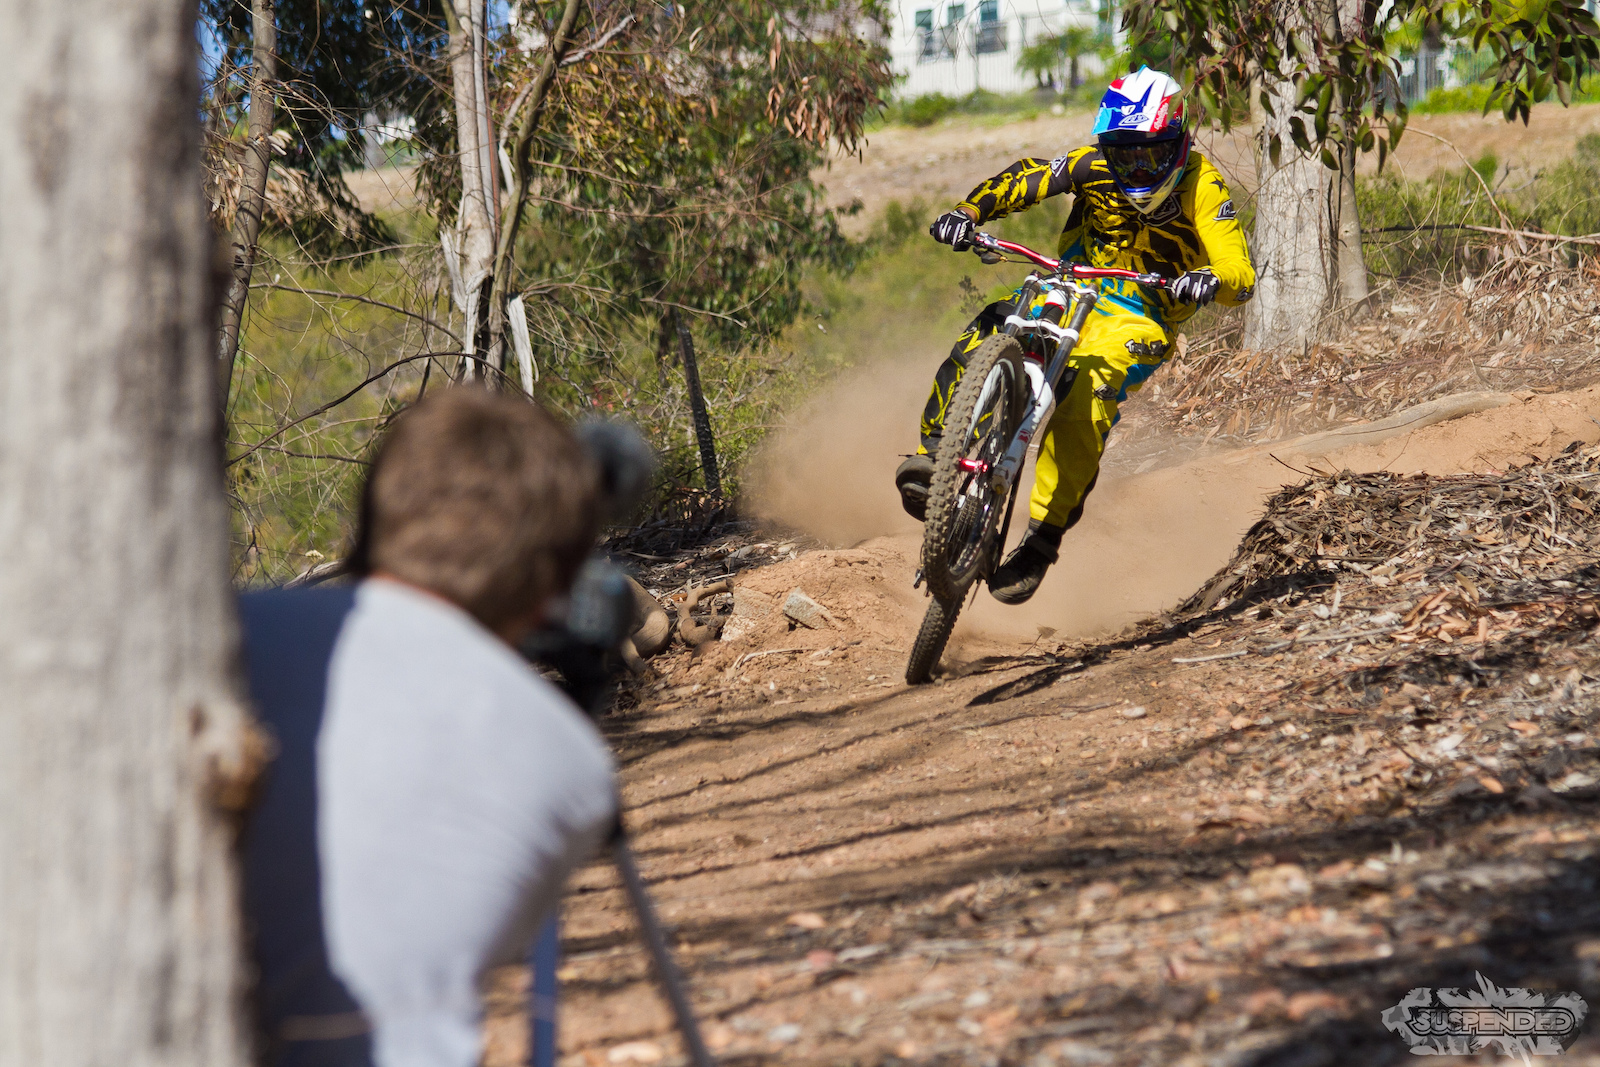 Video Shoot.. check out the Teaser http://www.pinkbike.com/video/261788/